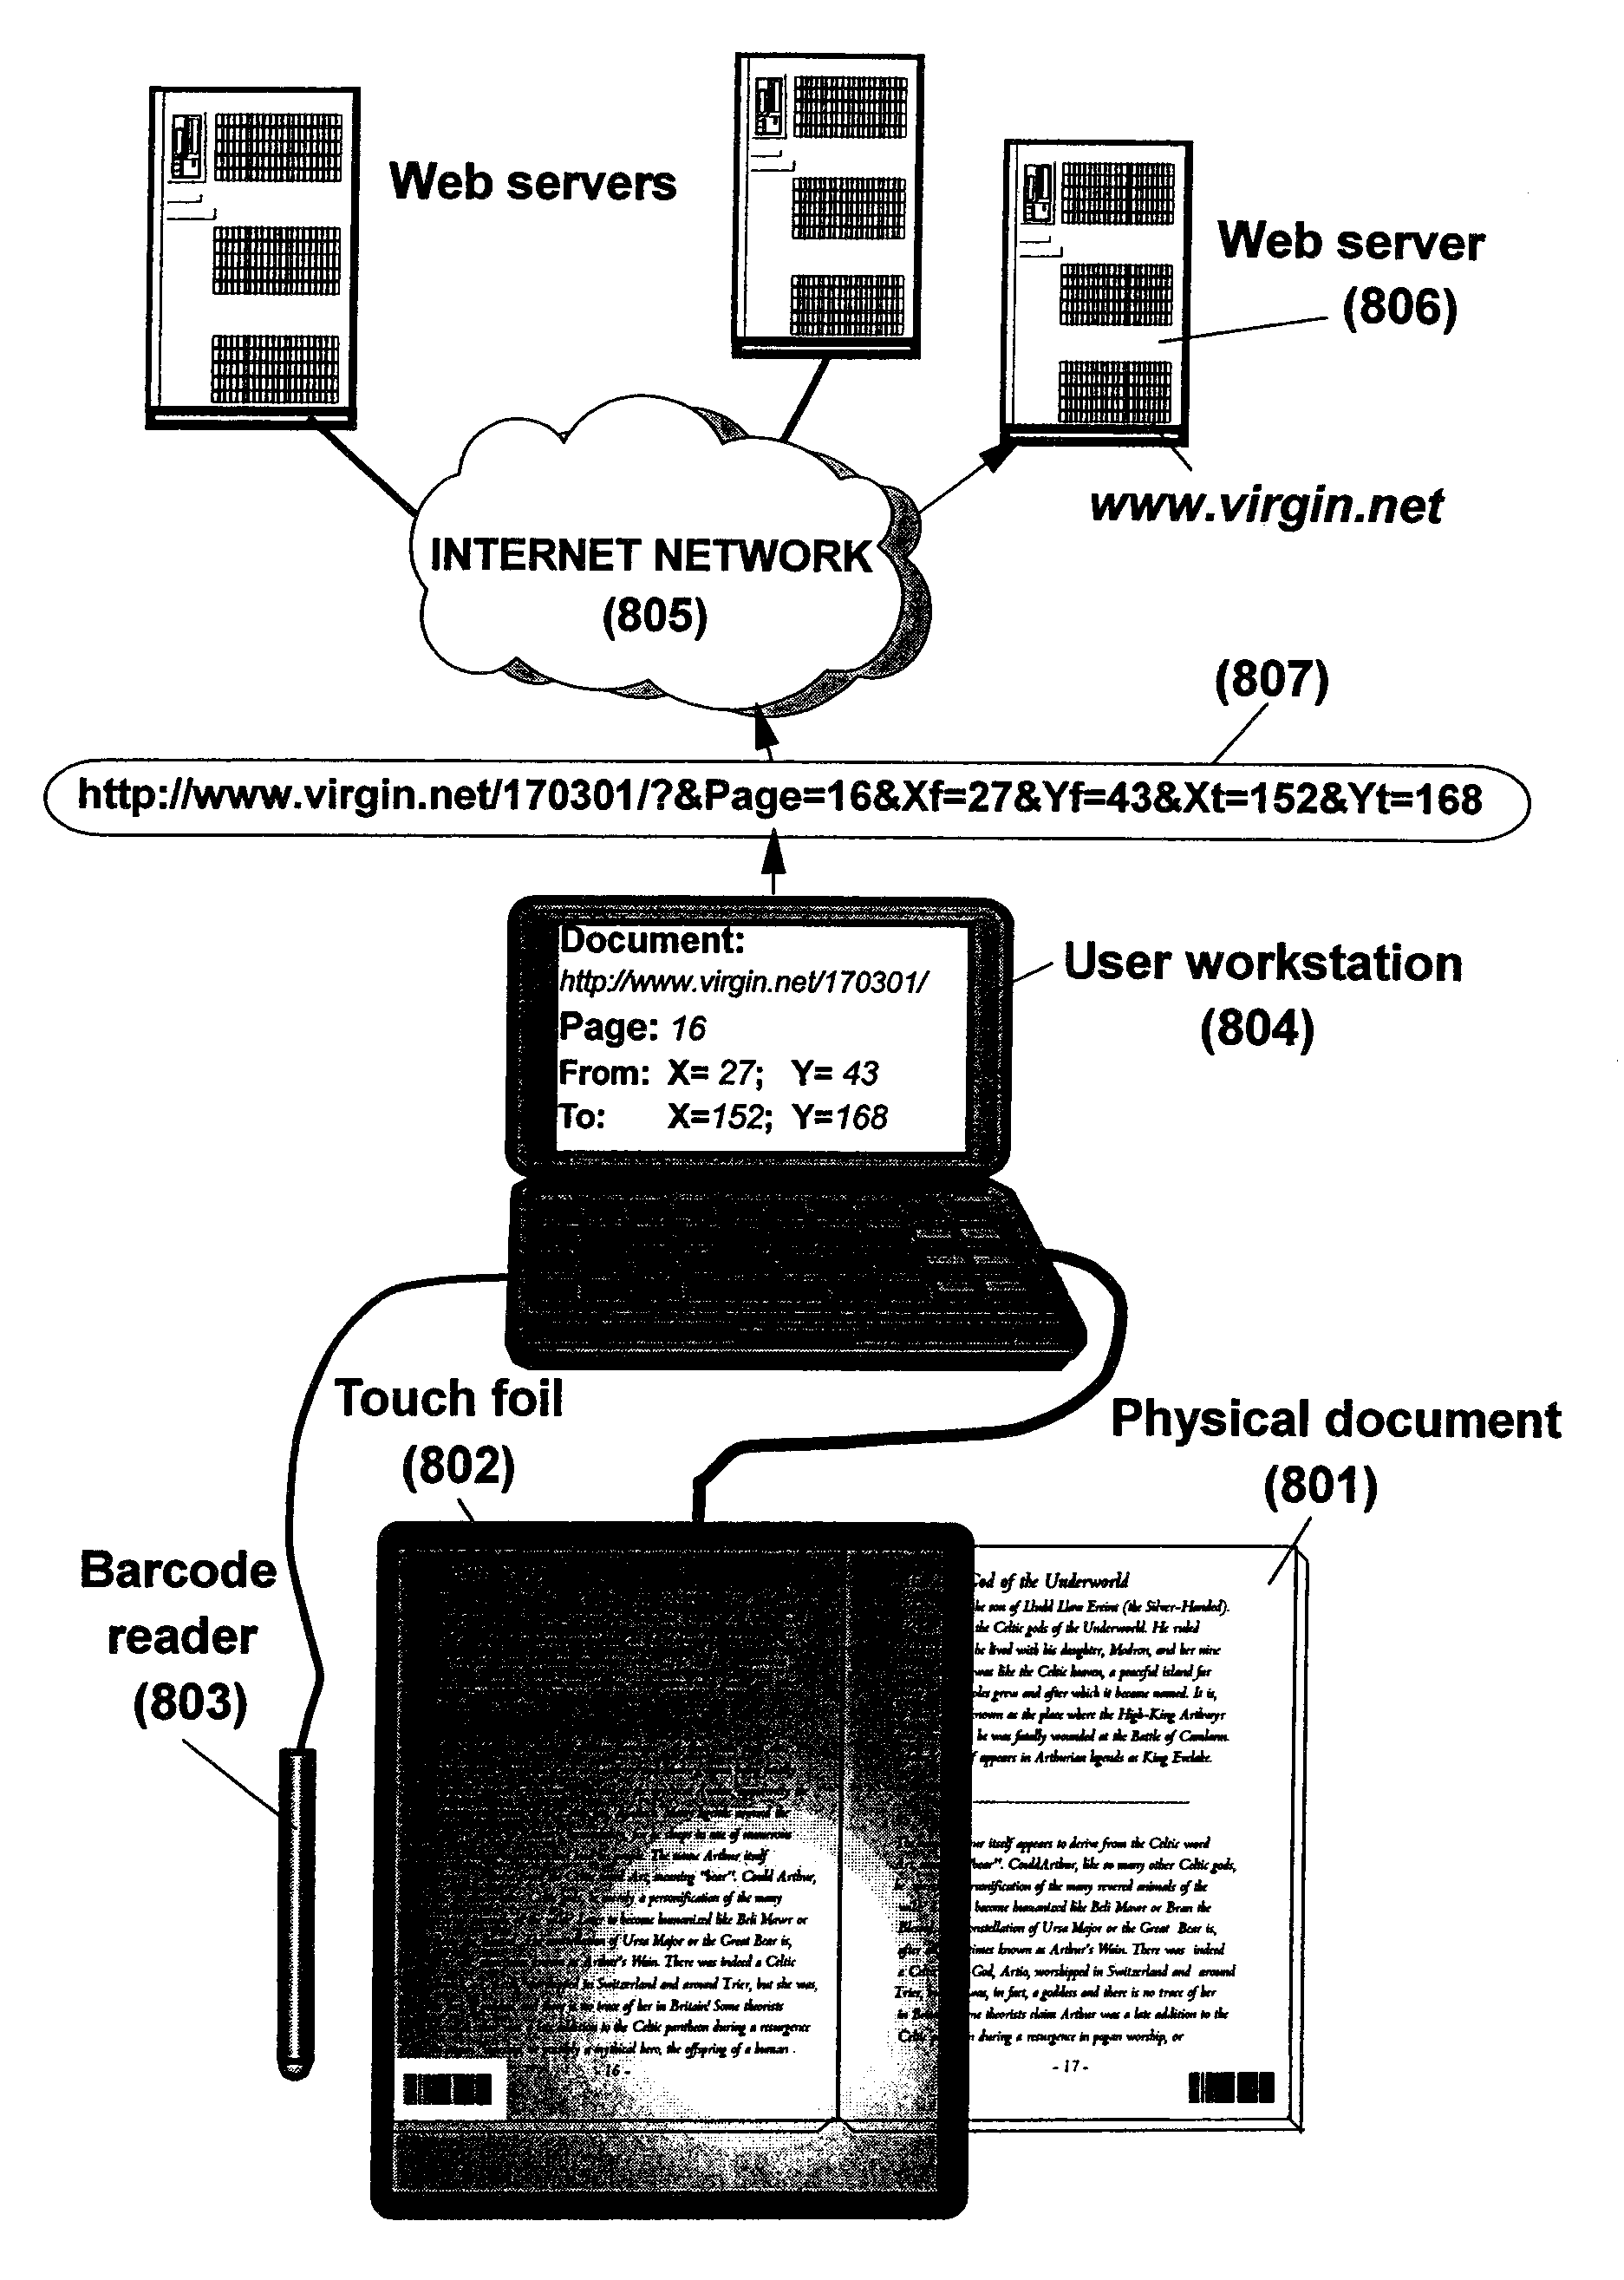 System and method to enable blind people to have access to information printed on a physical document